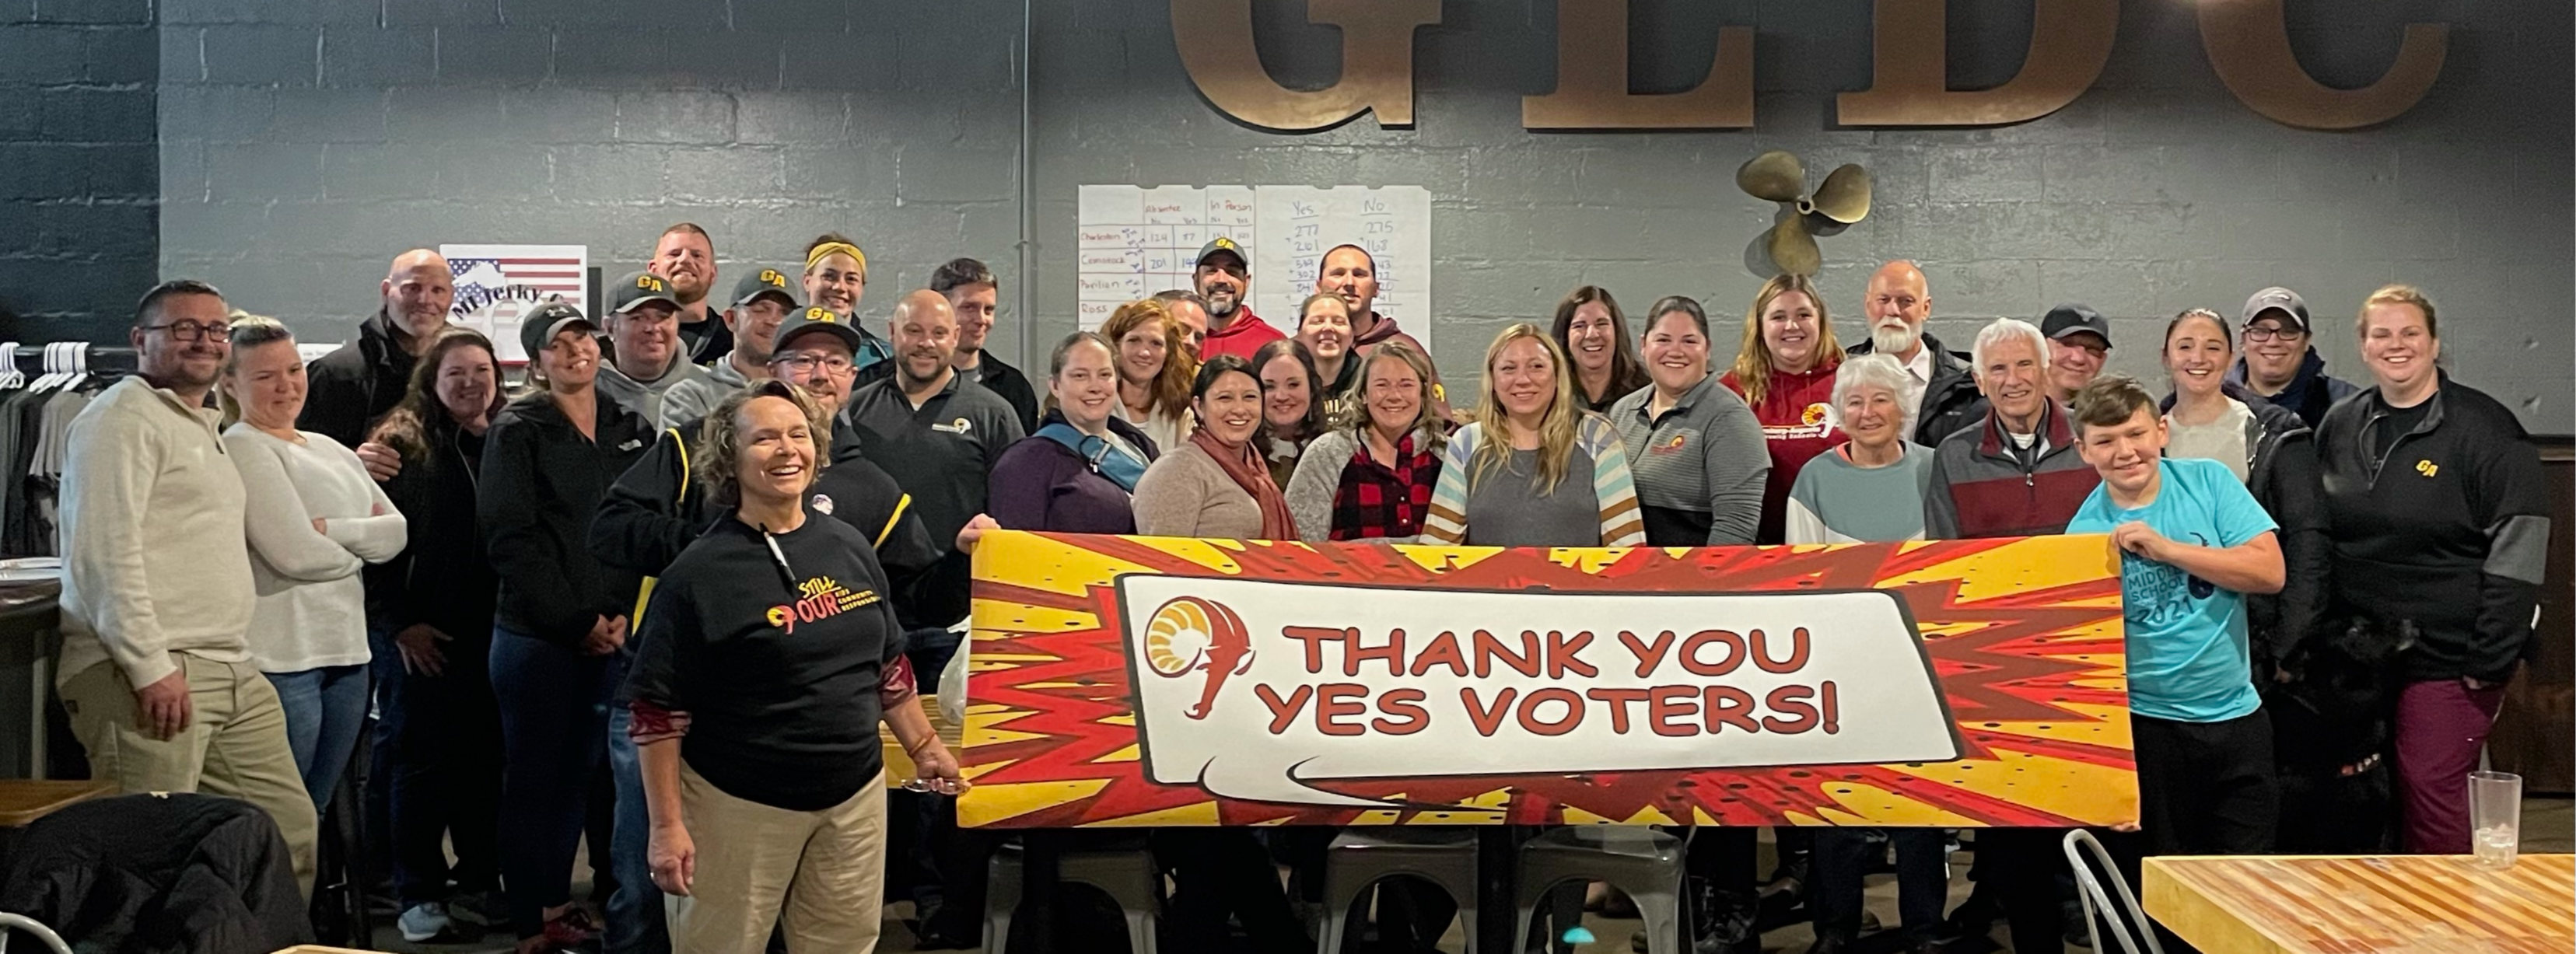 Ms. Somers and a group of GACS staff and community members are smiling and holding a banner that says Thank You Yes Voters! 